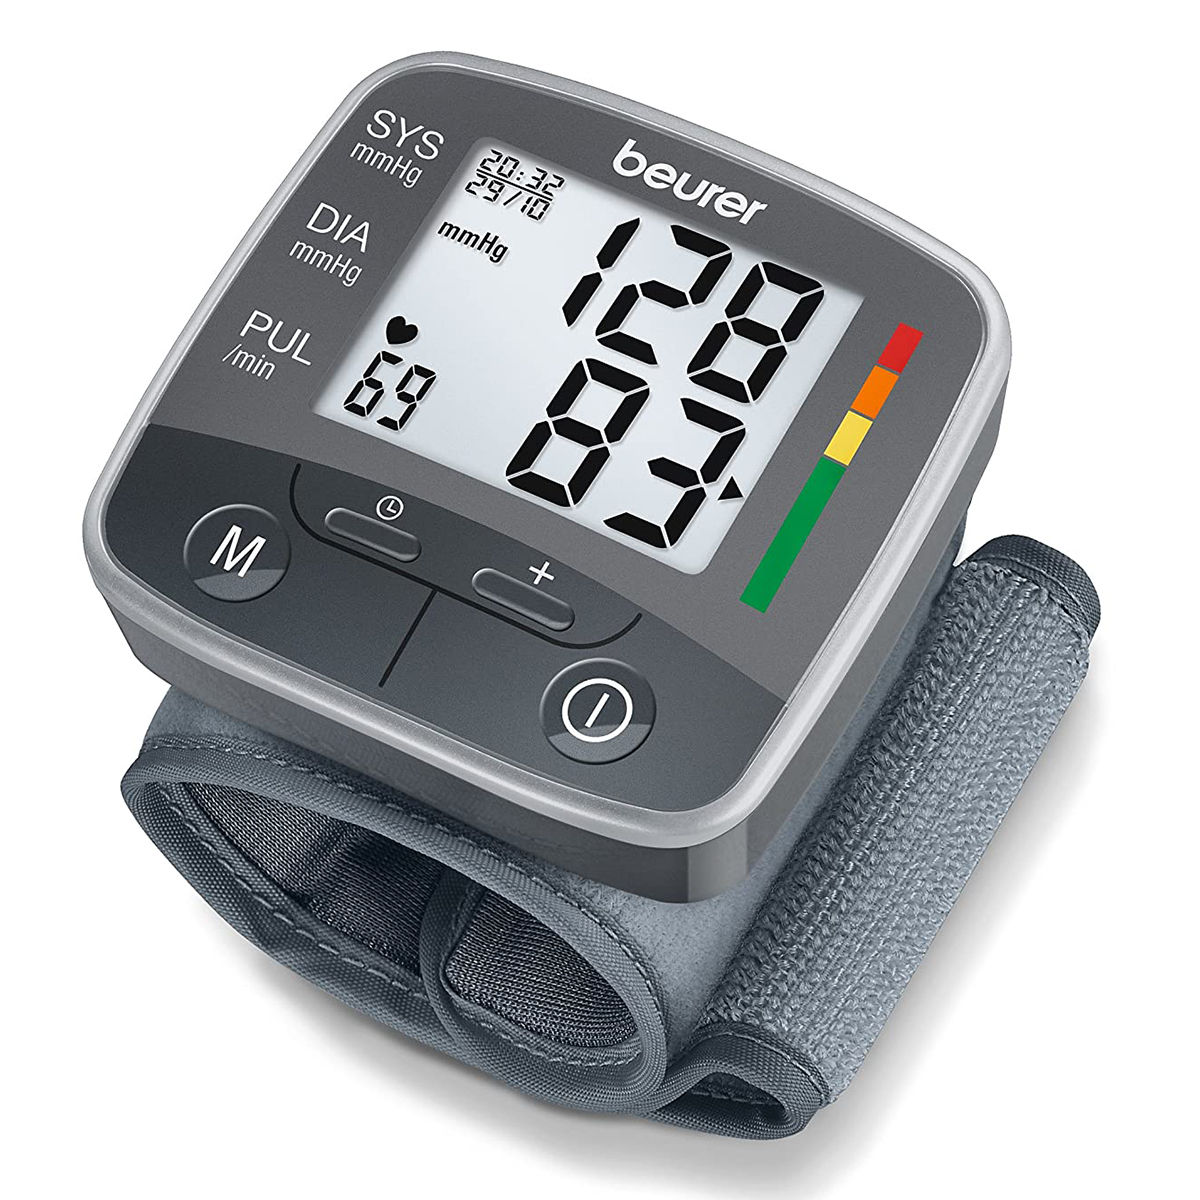 Beurer BC 32 Wrist Blood Pressure Monitor, 1 Count, Pack of 1 